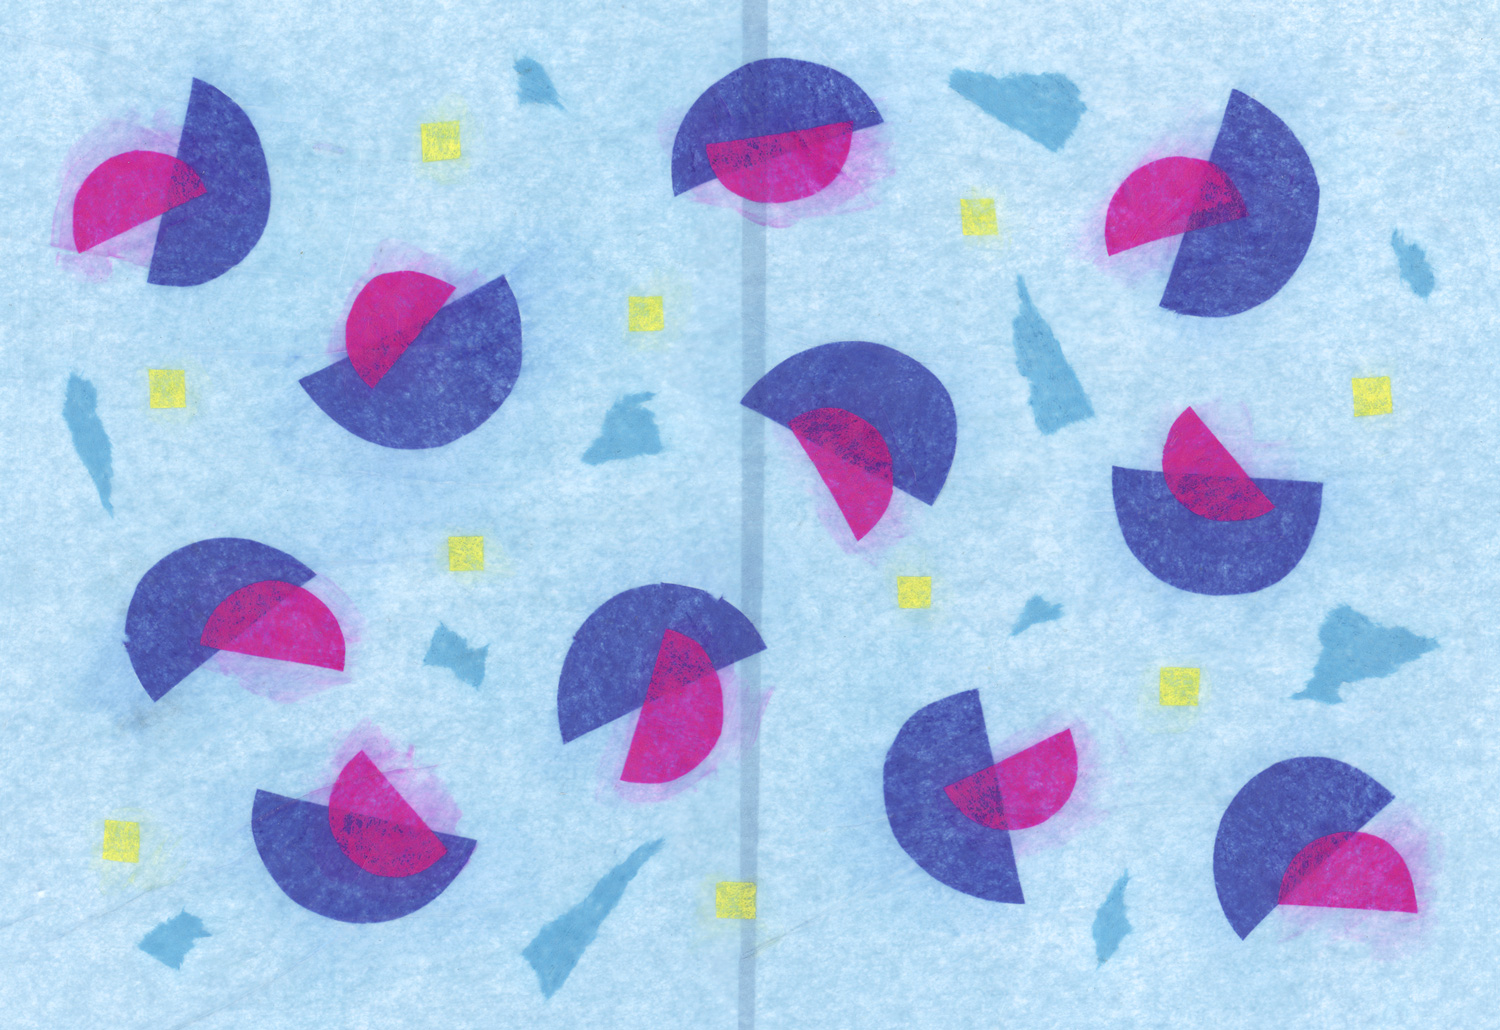 An abstract composition of shapes comprising of pink and blue half circles, yellow squares, and ripped blue paper on a light blue background.